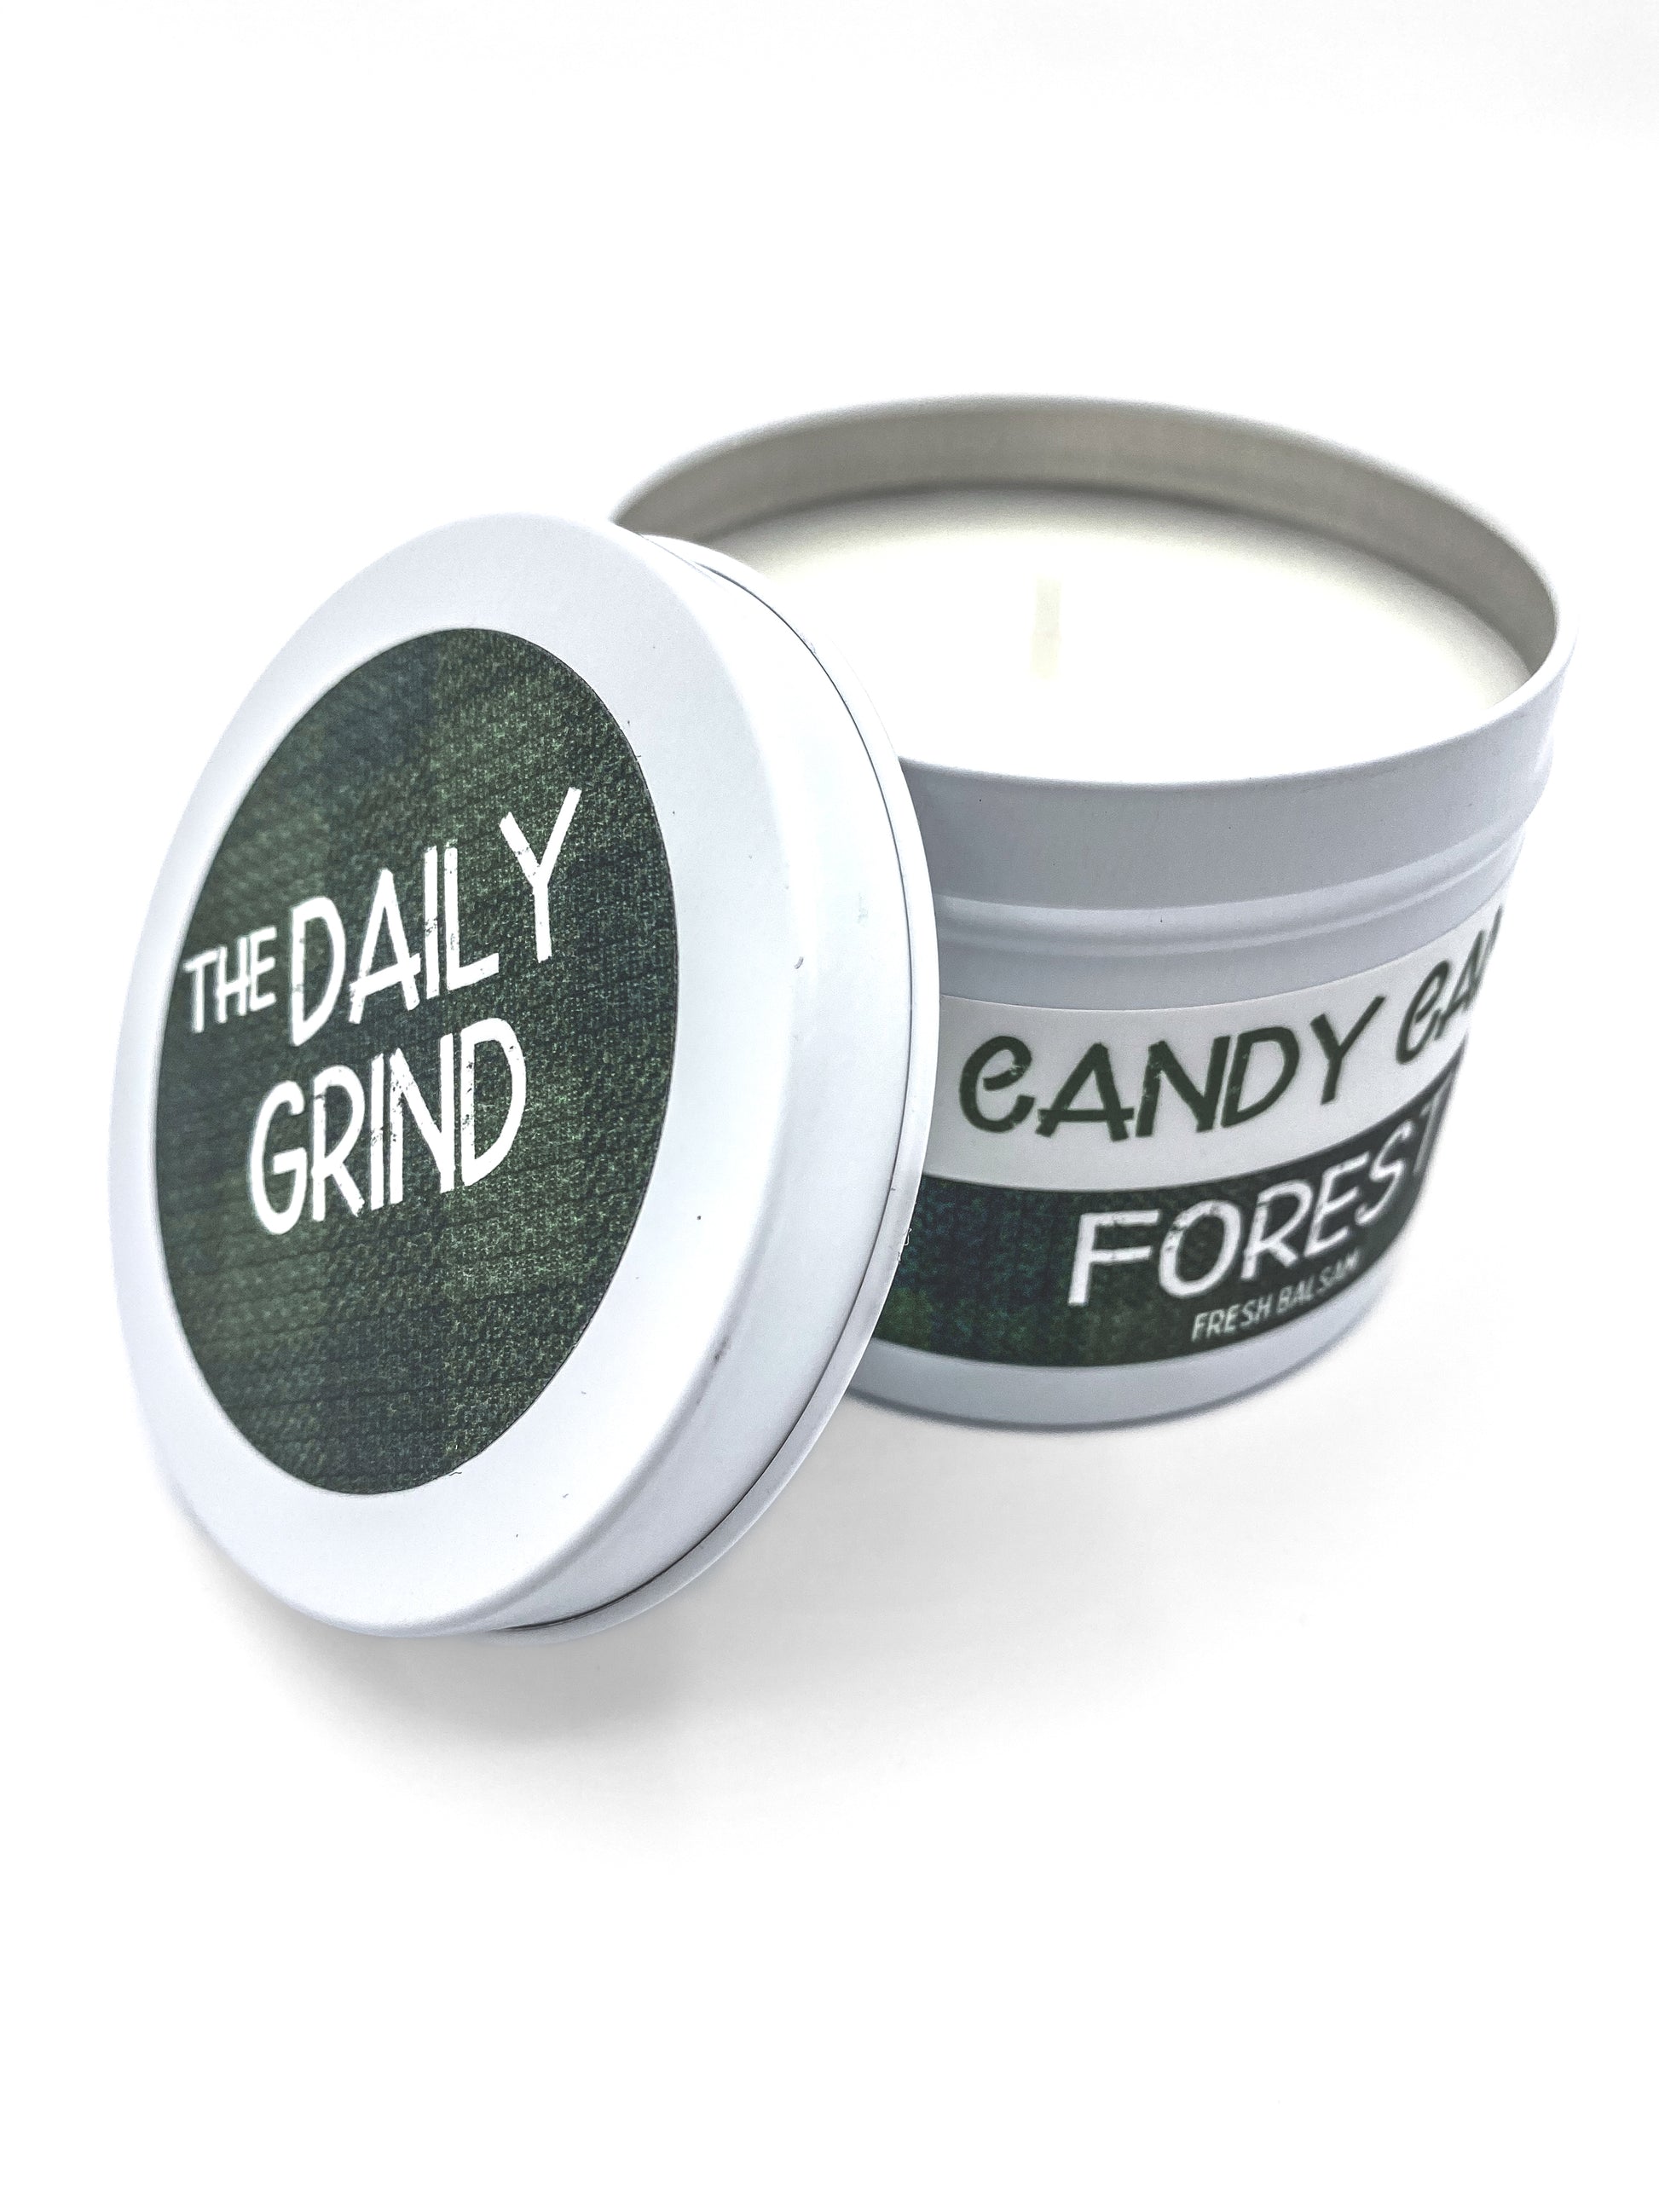 Unlit "Candy Cane Forest" candle in white tin